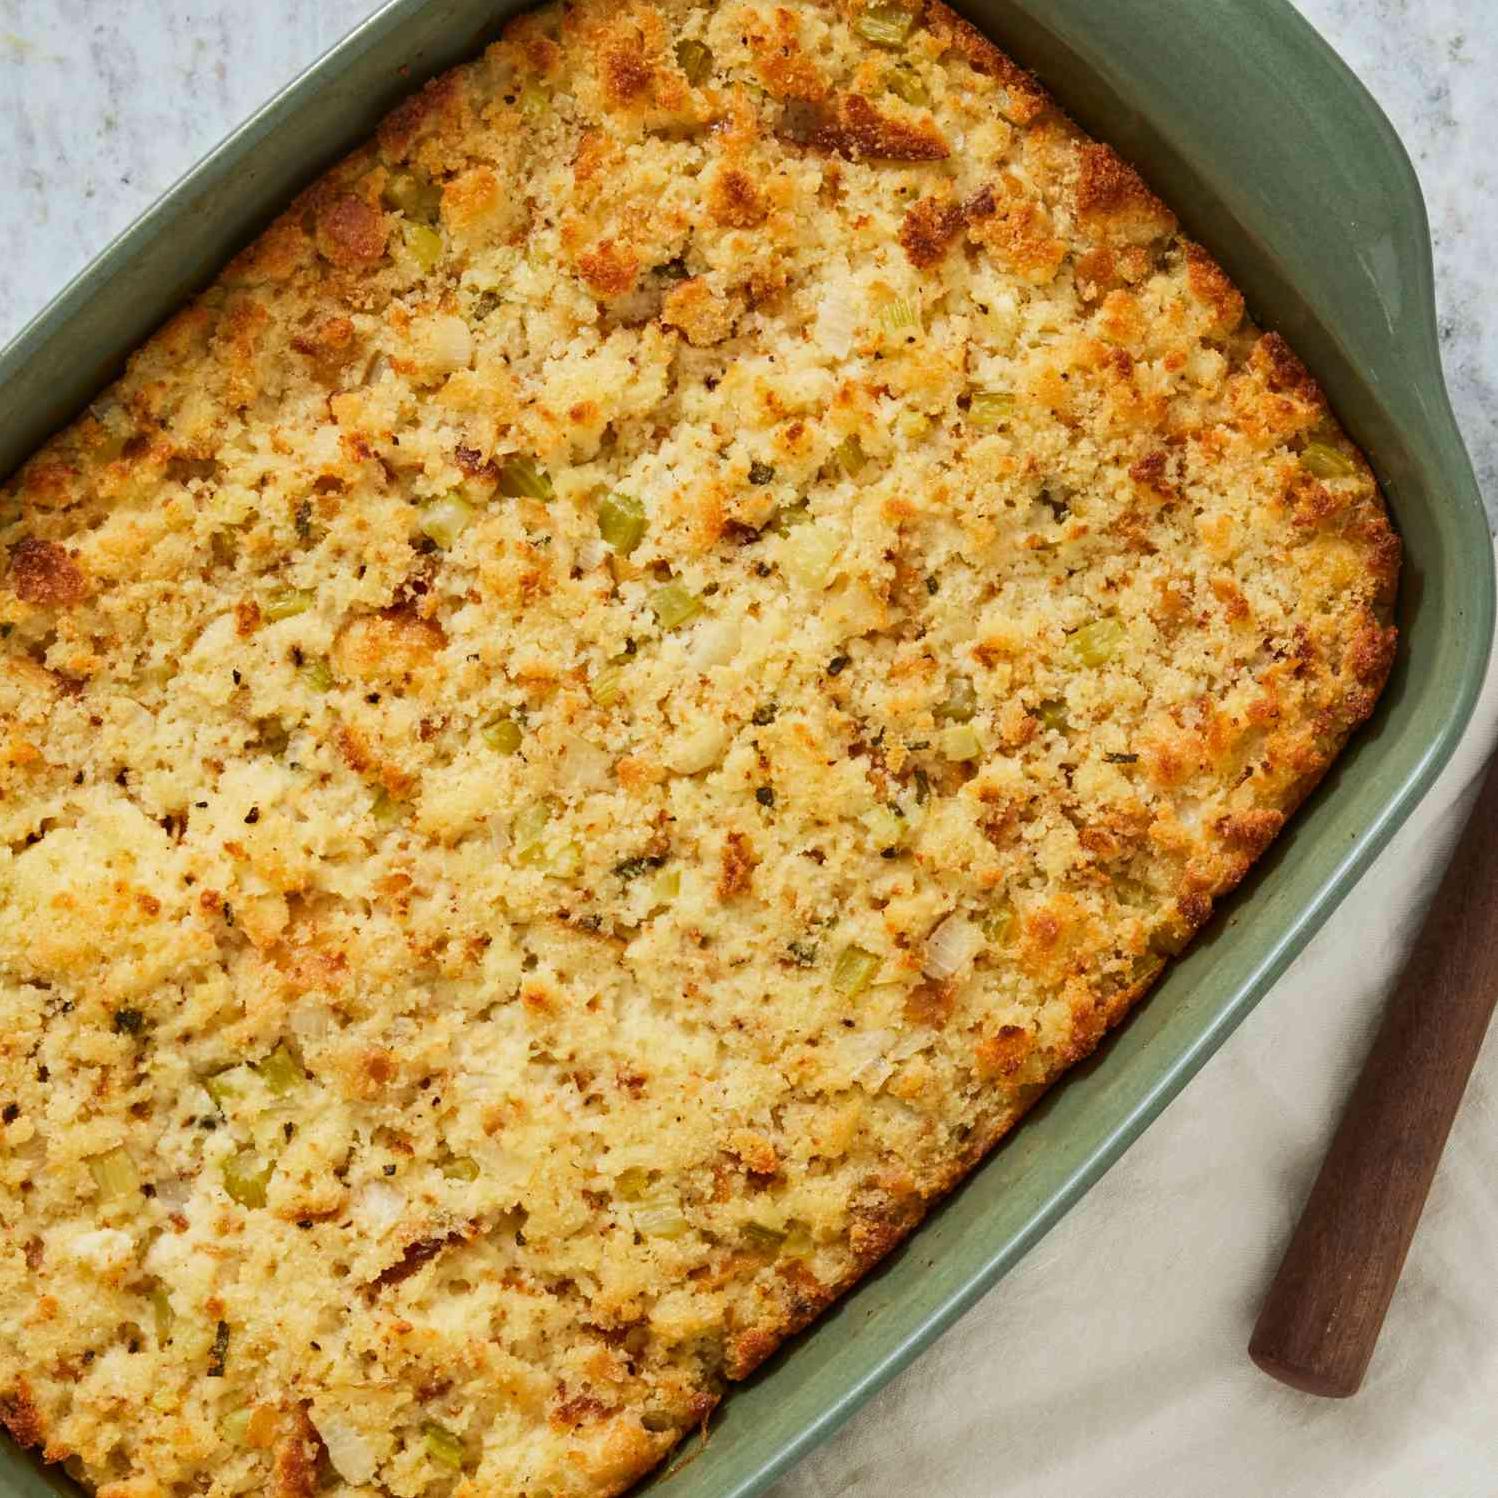  Say hello to my southern-style cornbread dressing!